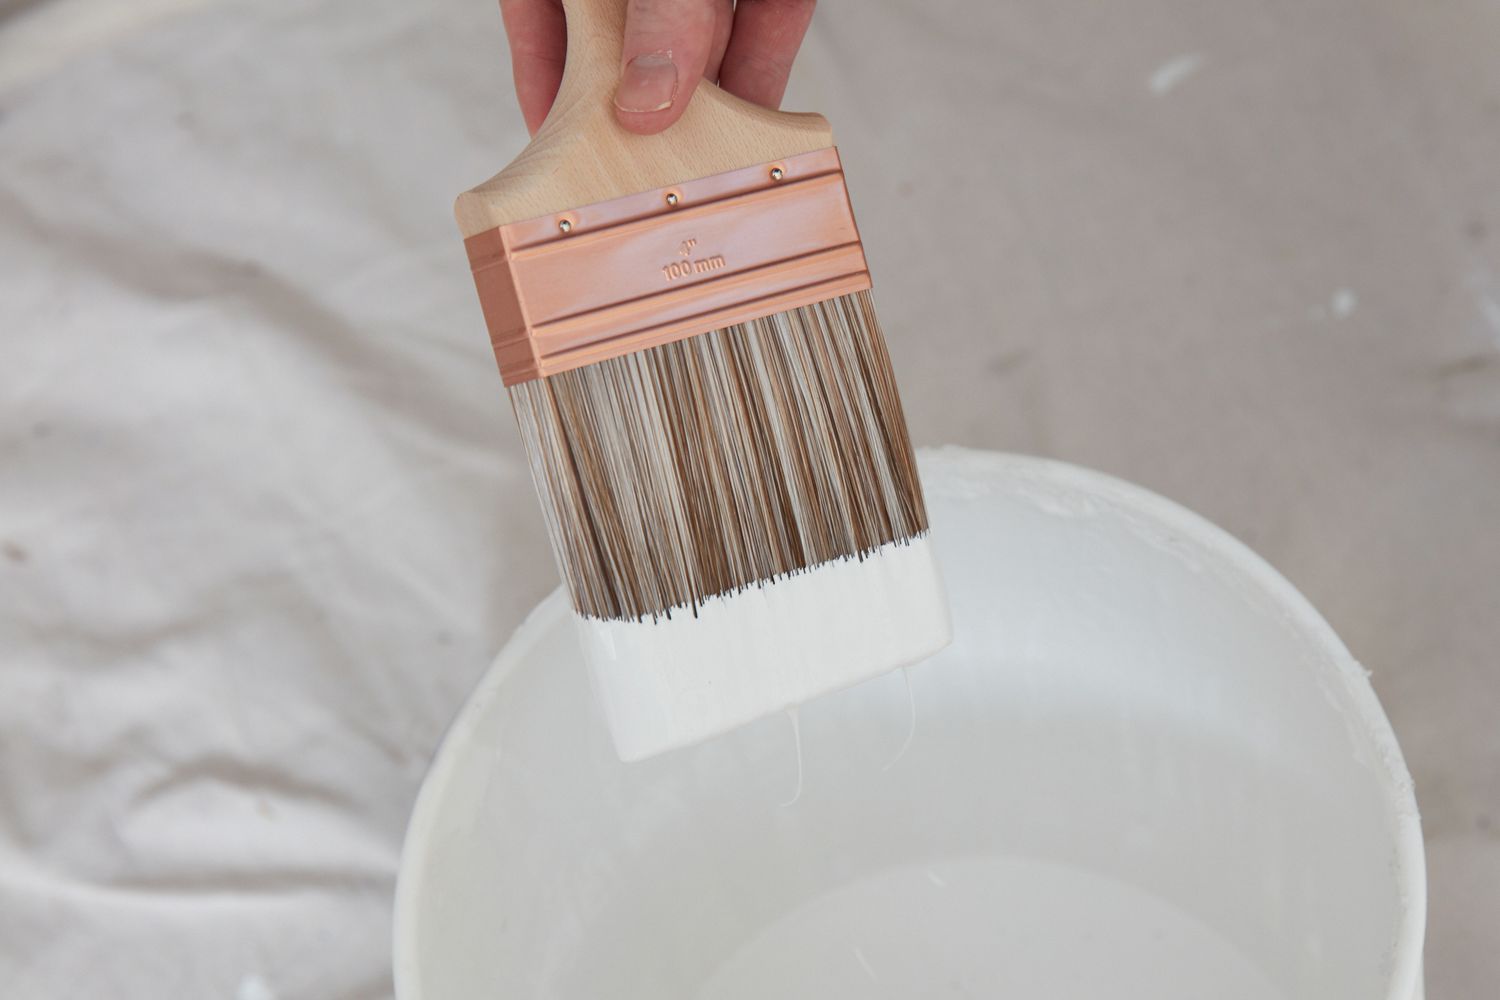 Paint brush dipped in white paint over bucket